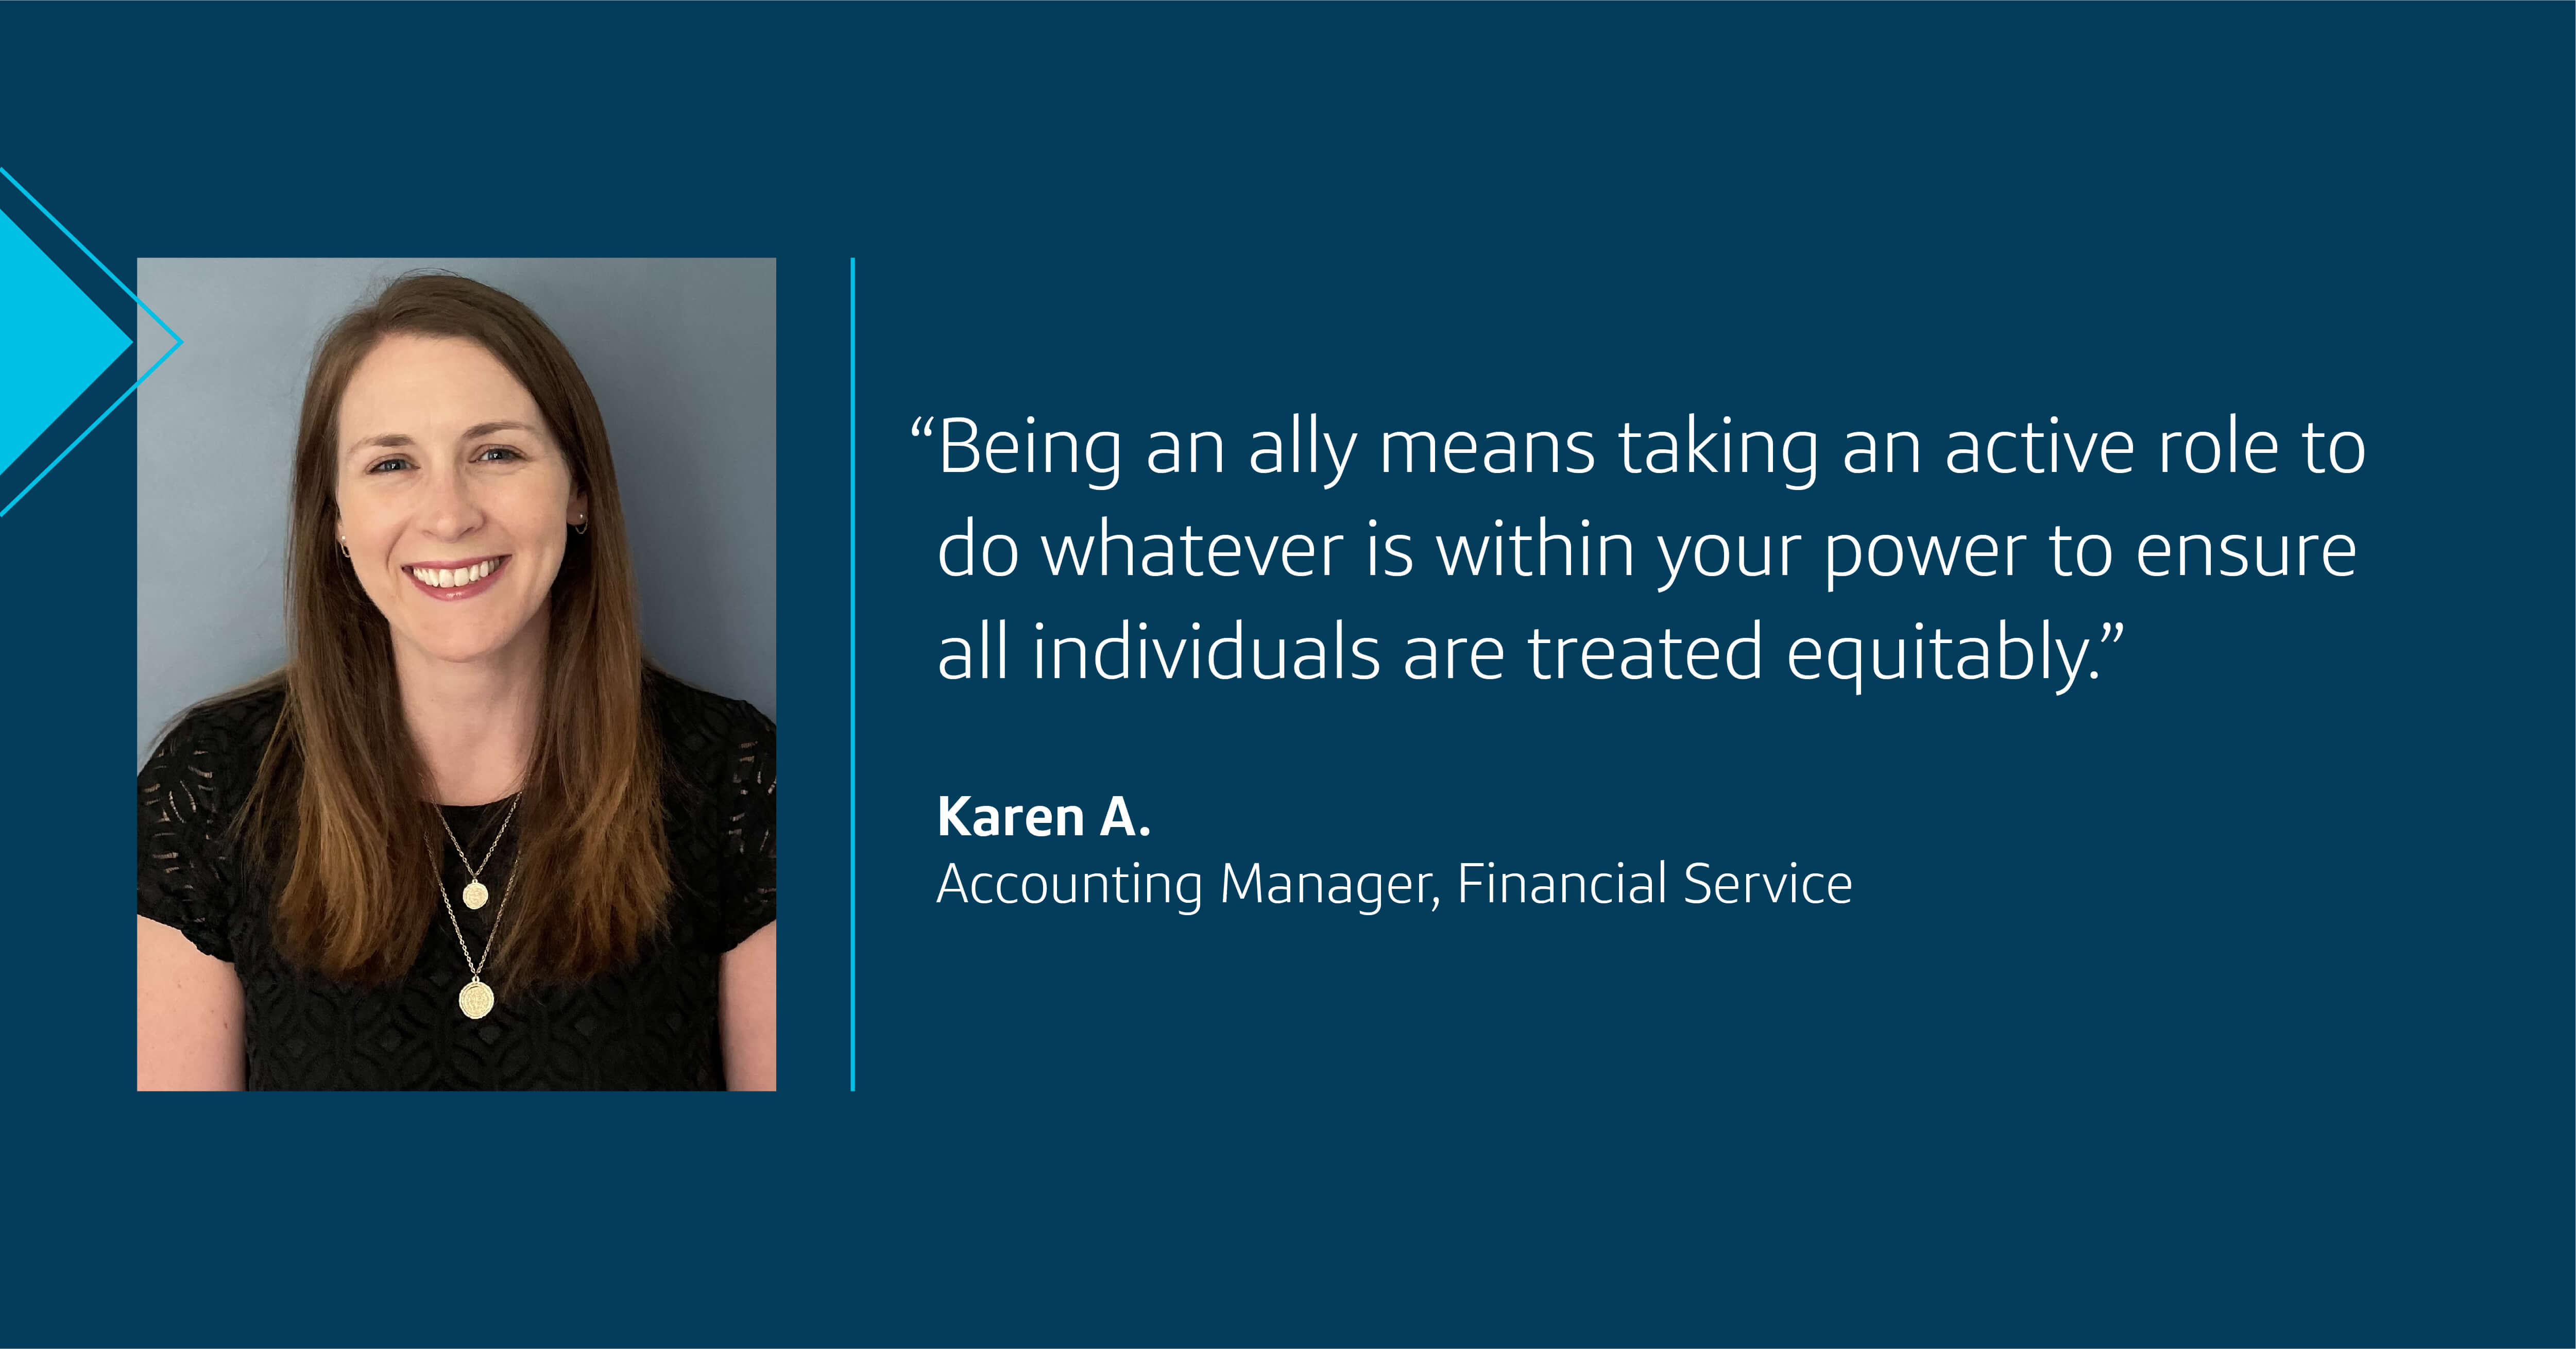 A picture of Capital One associate Karen, with her quote, “Being an ally means taking an active role to do whatever is within your power to ensure all individuals are treated equitably.